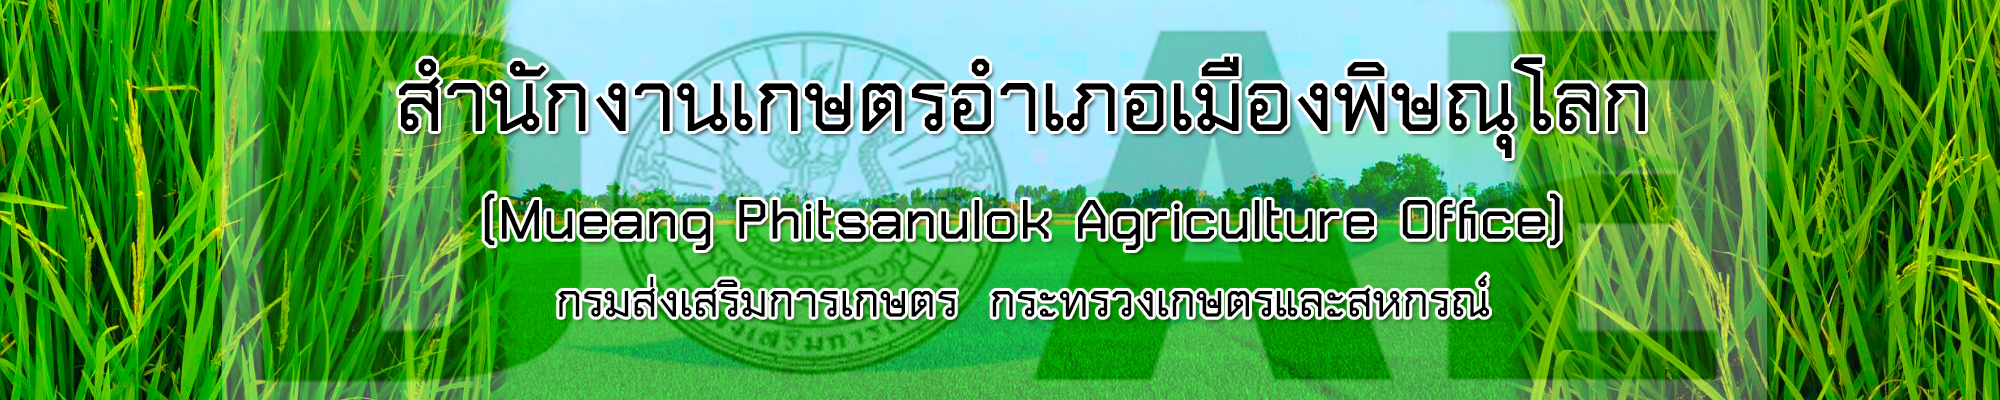 Mueang Phitsanulok Agriculture Office